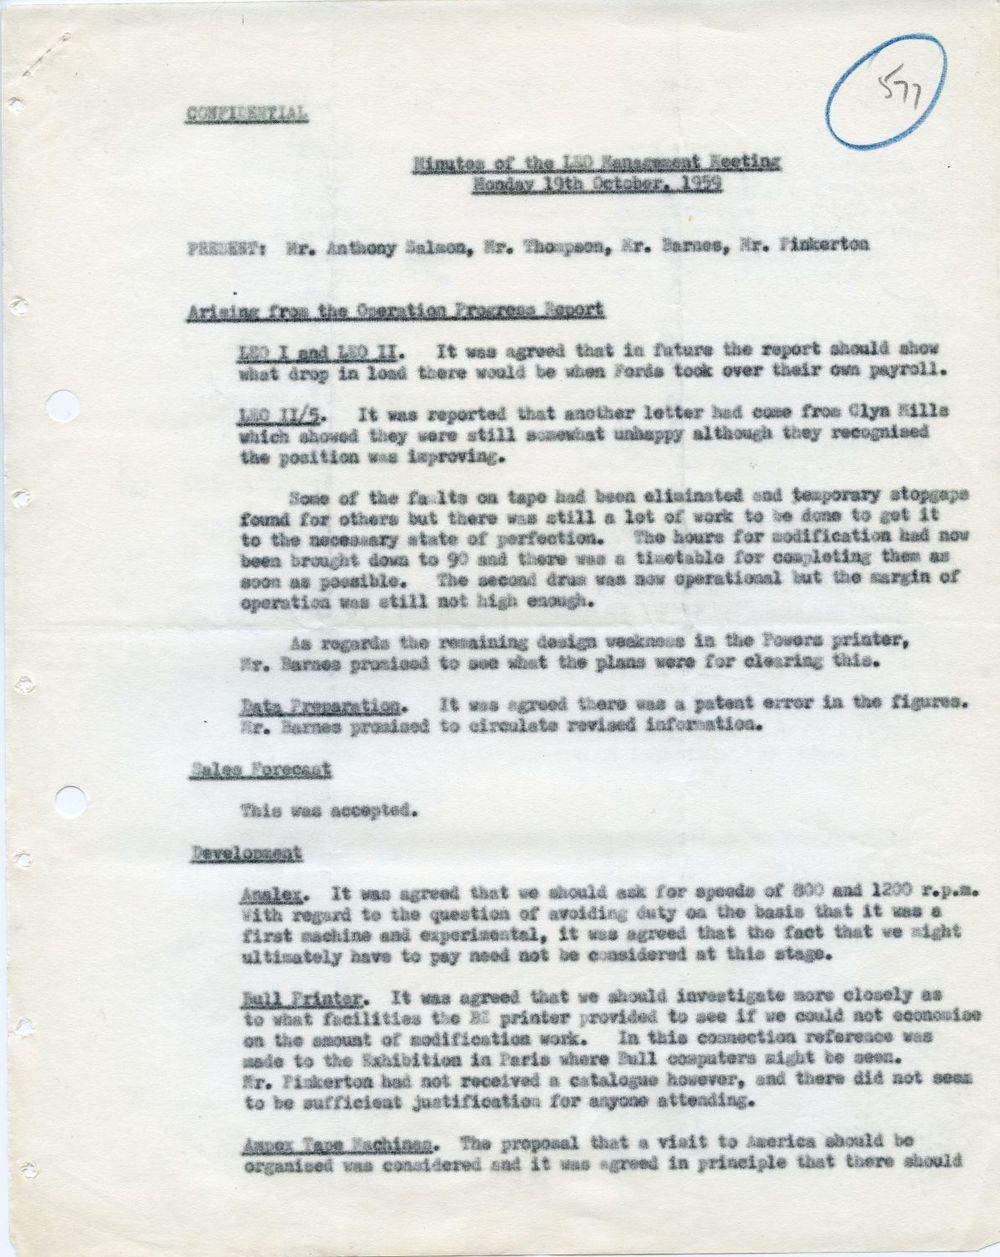 Article: 56048 LEO Management Meeting, 19/10/1959